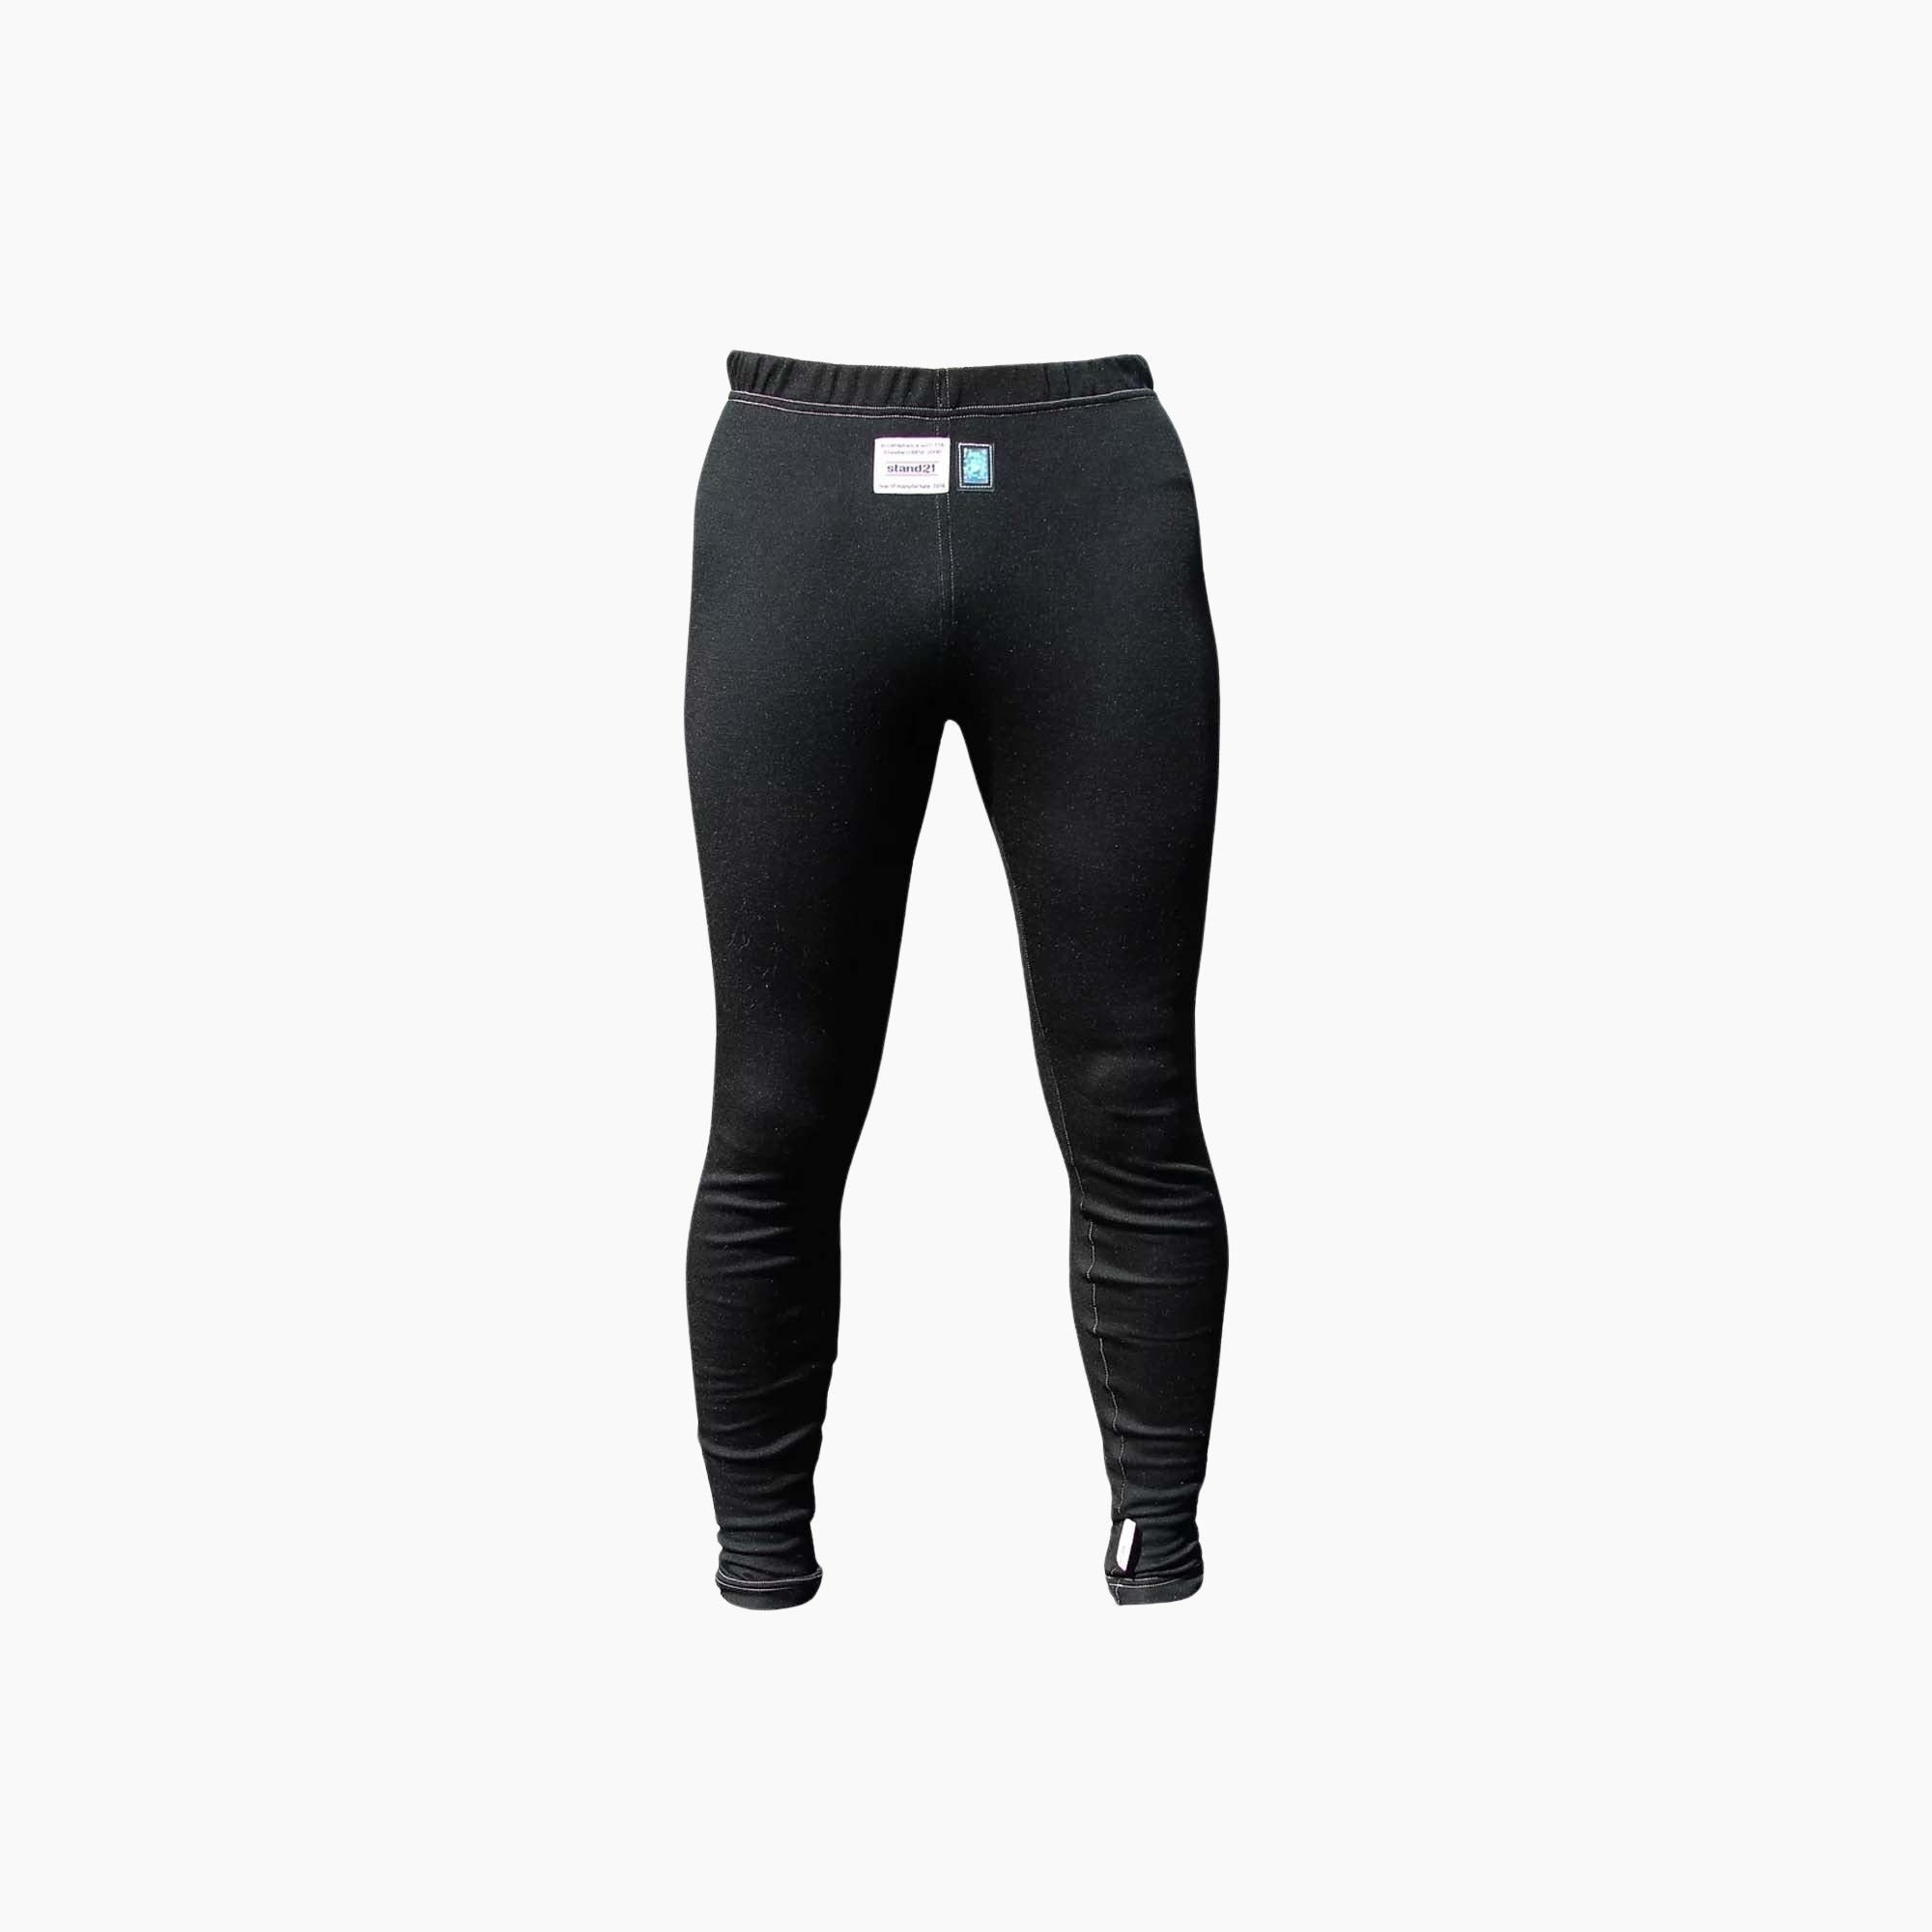 Stand 21 | Underwear Top Fit Pants Black-Racing Underwear-STAND 21-gpx-store